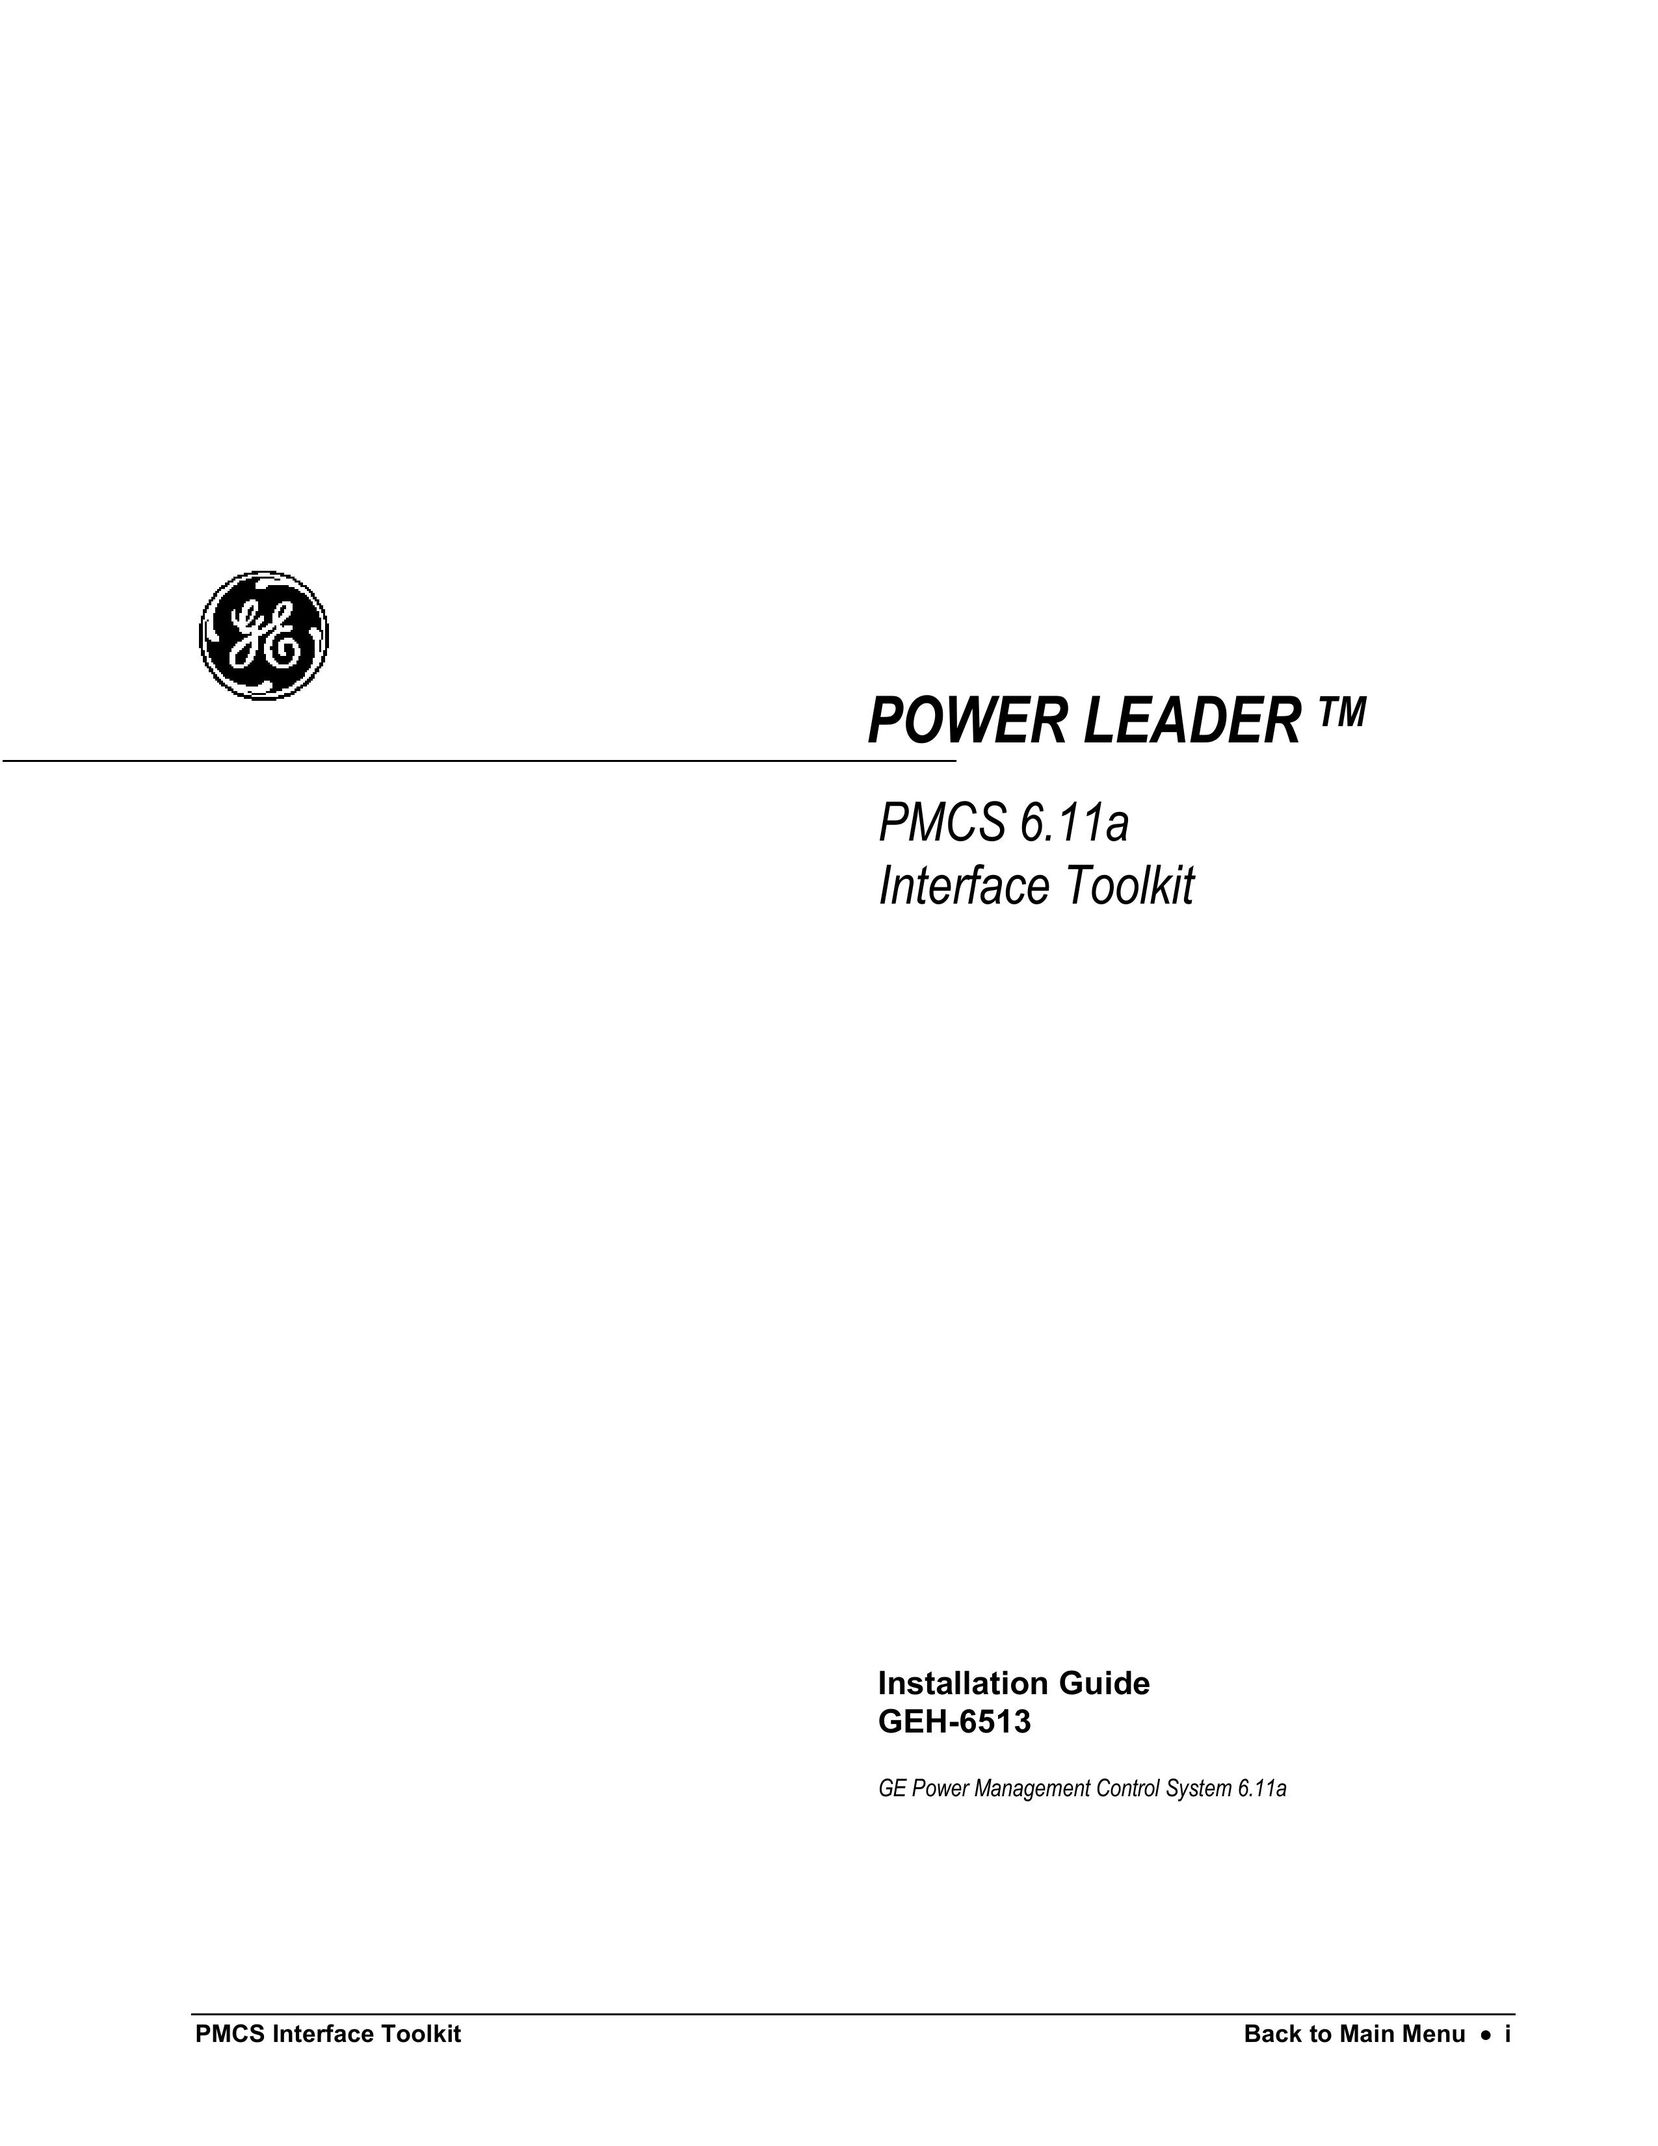 GE PMCS 6.11a Network Card User Manual